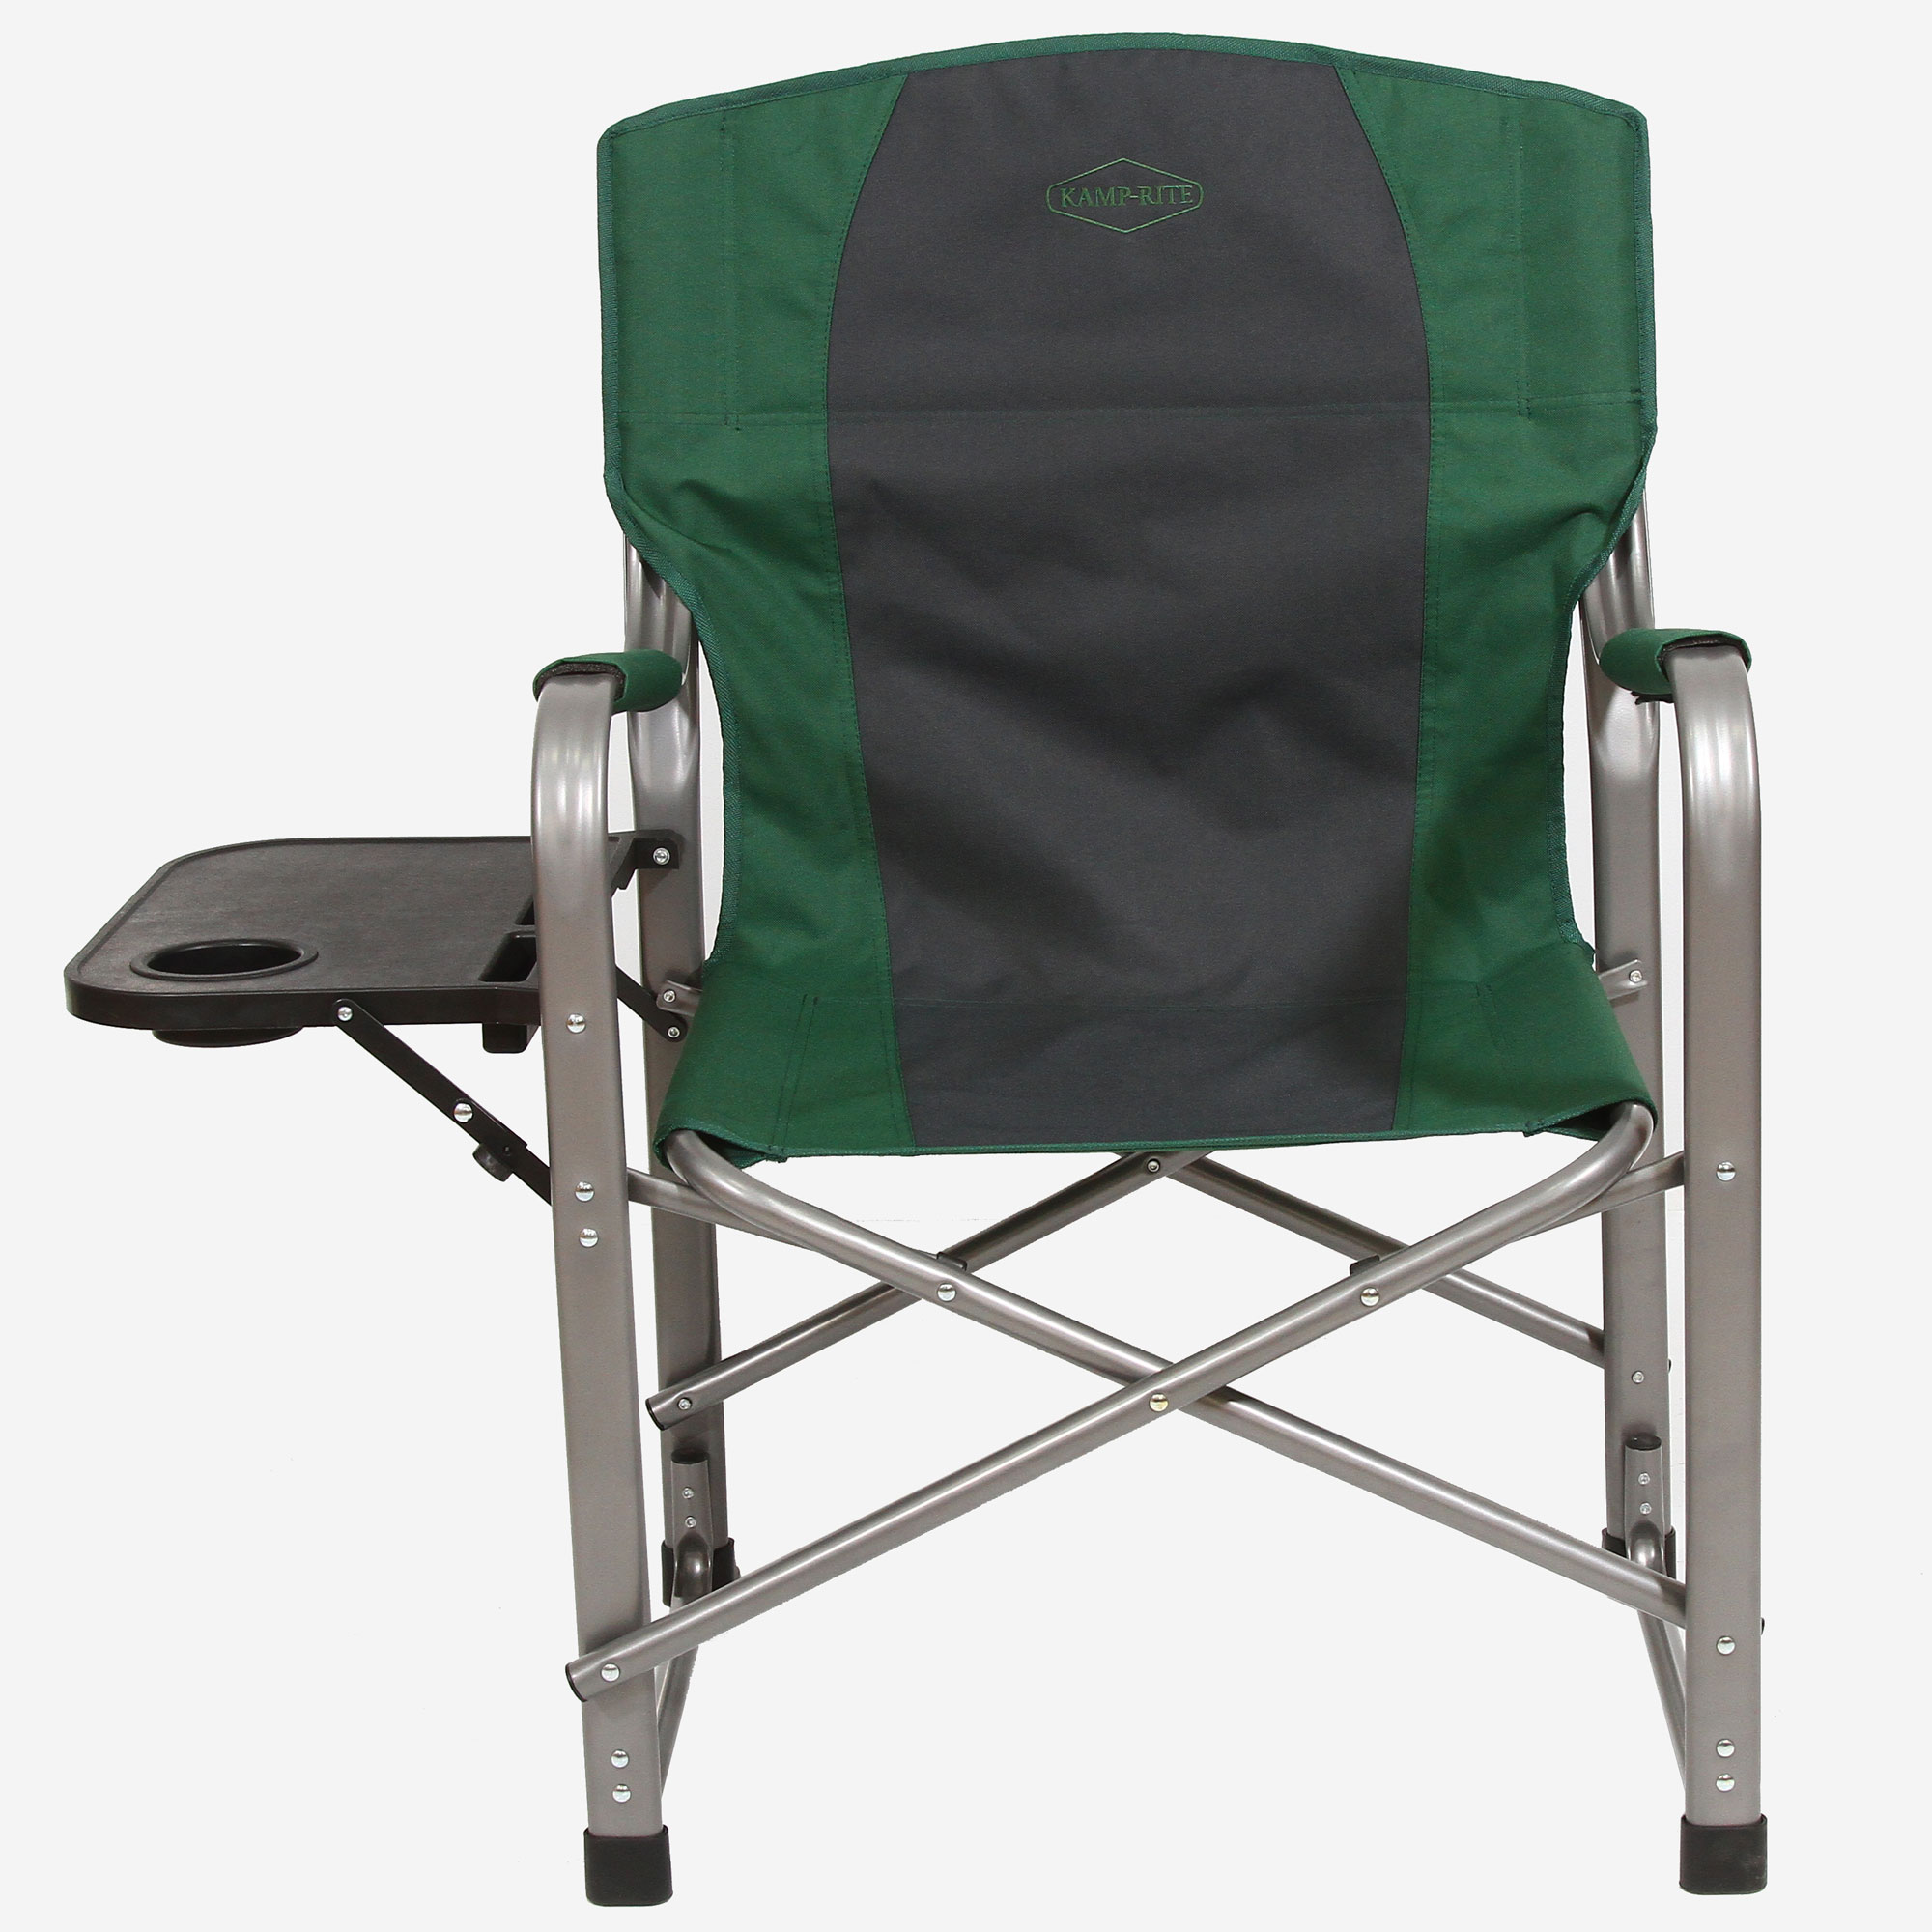 Kamp-Rite Director's Chair Outdoor Camping Folding Chair with Side Table, Green - image 3 of 4